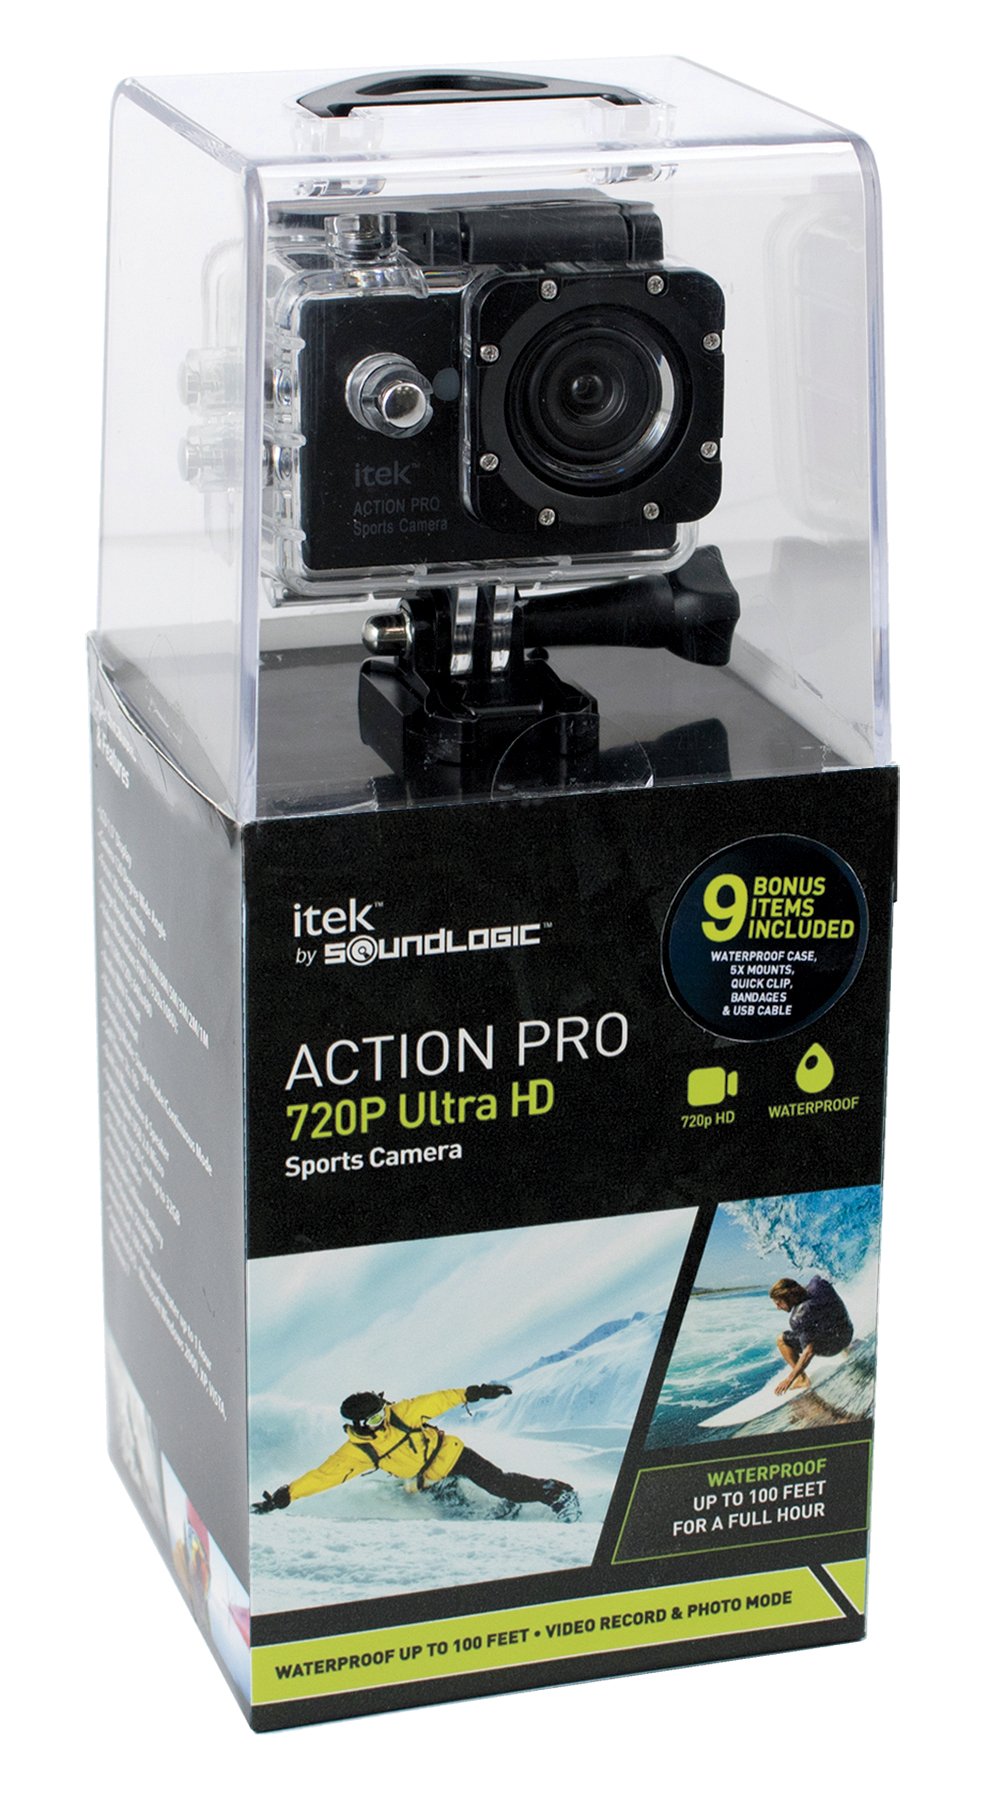 picture Occlusion Peep iTek Action Pro 720P Ultra HD Sports Camera - Shop iTek Action Pro 720P  Ultra HD Sports Camera - Shop iTek Action Pro 720P Ultra HD Sports Camera -  Shop iTek Action